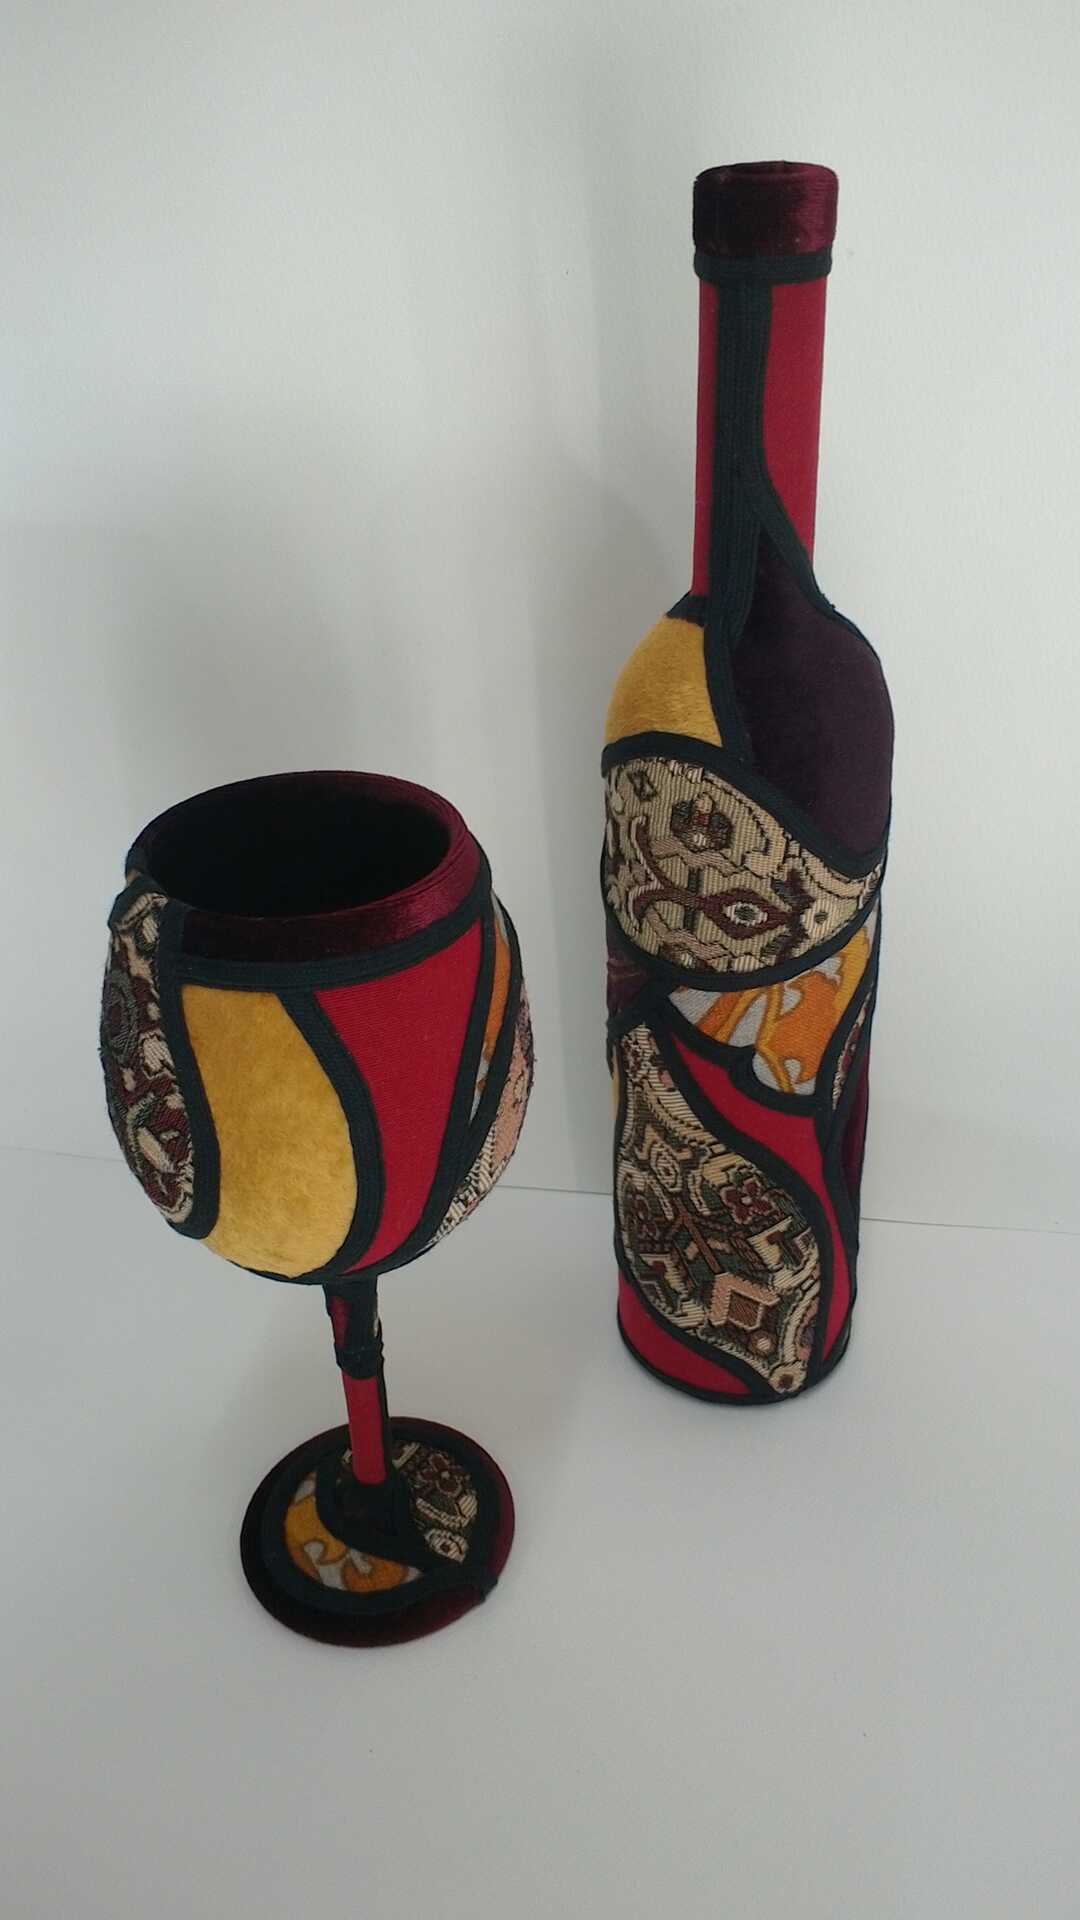 Sculpture 'A Good Drop' by Libby Bloxham. A wine bottle and wine glass are covered in swatches of various fabrics. The fabric covering is segmented into irregular panels with thick black binding, complimenting the contours of the shapes.